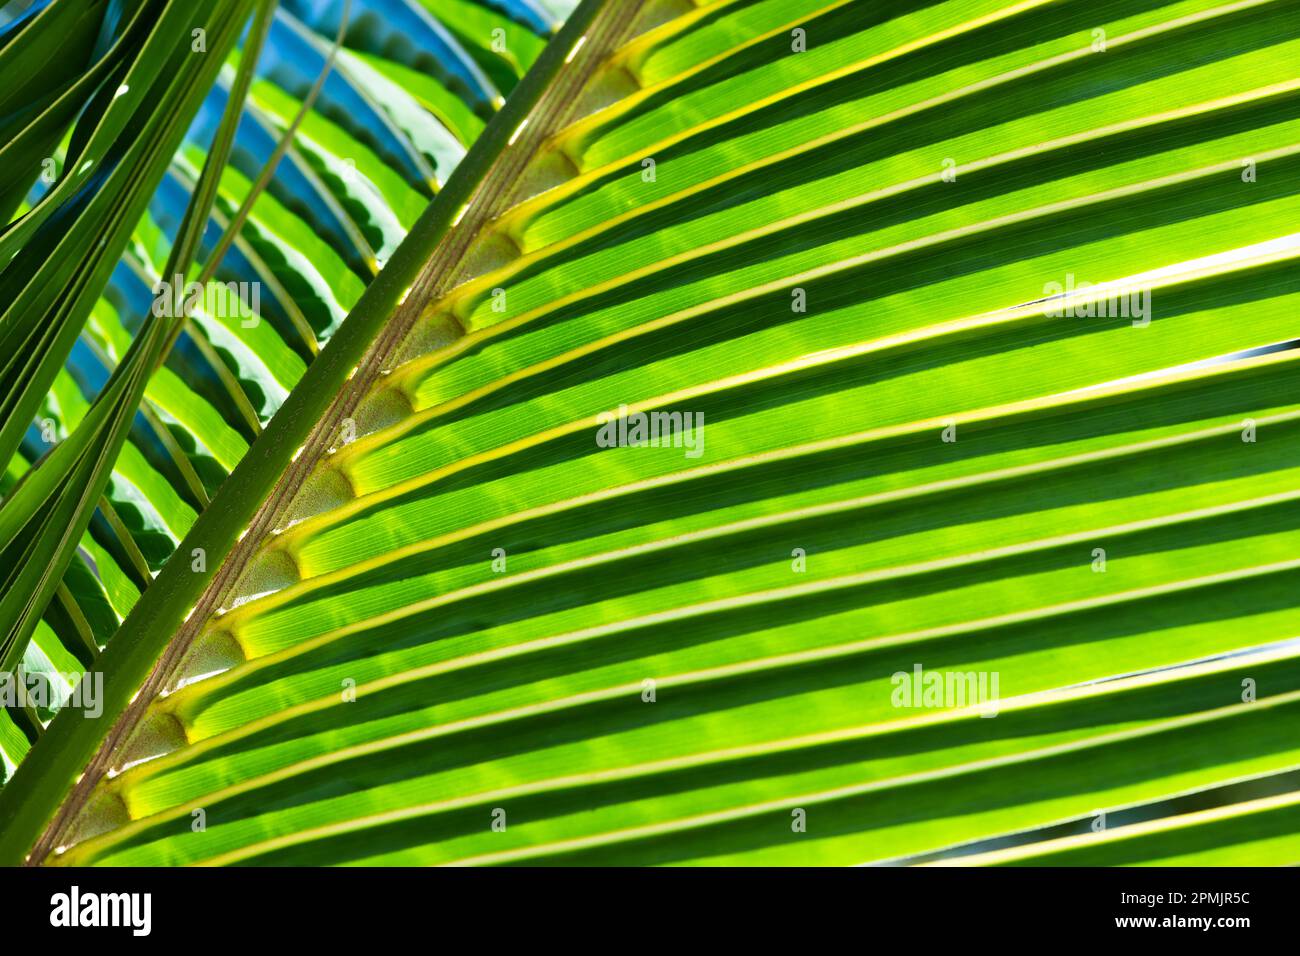 Green palm leaf in a sunlight, natural abstract background photo texture Stock Photo